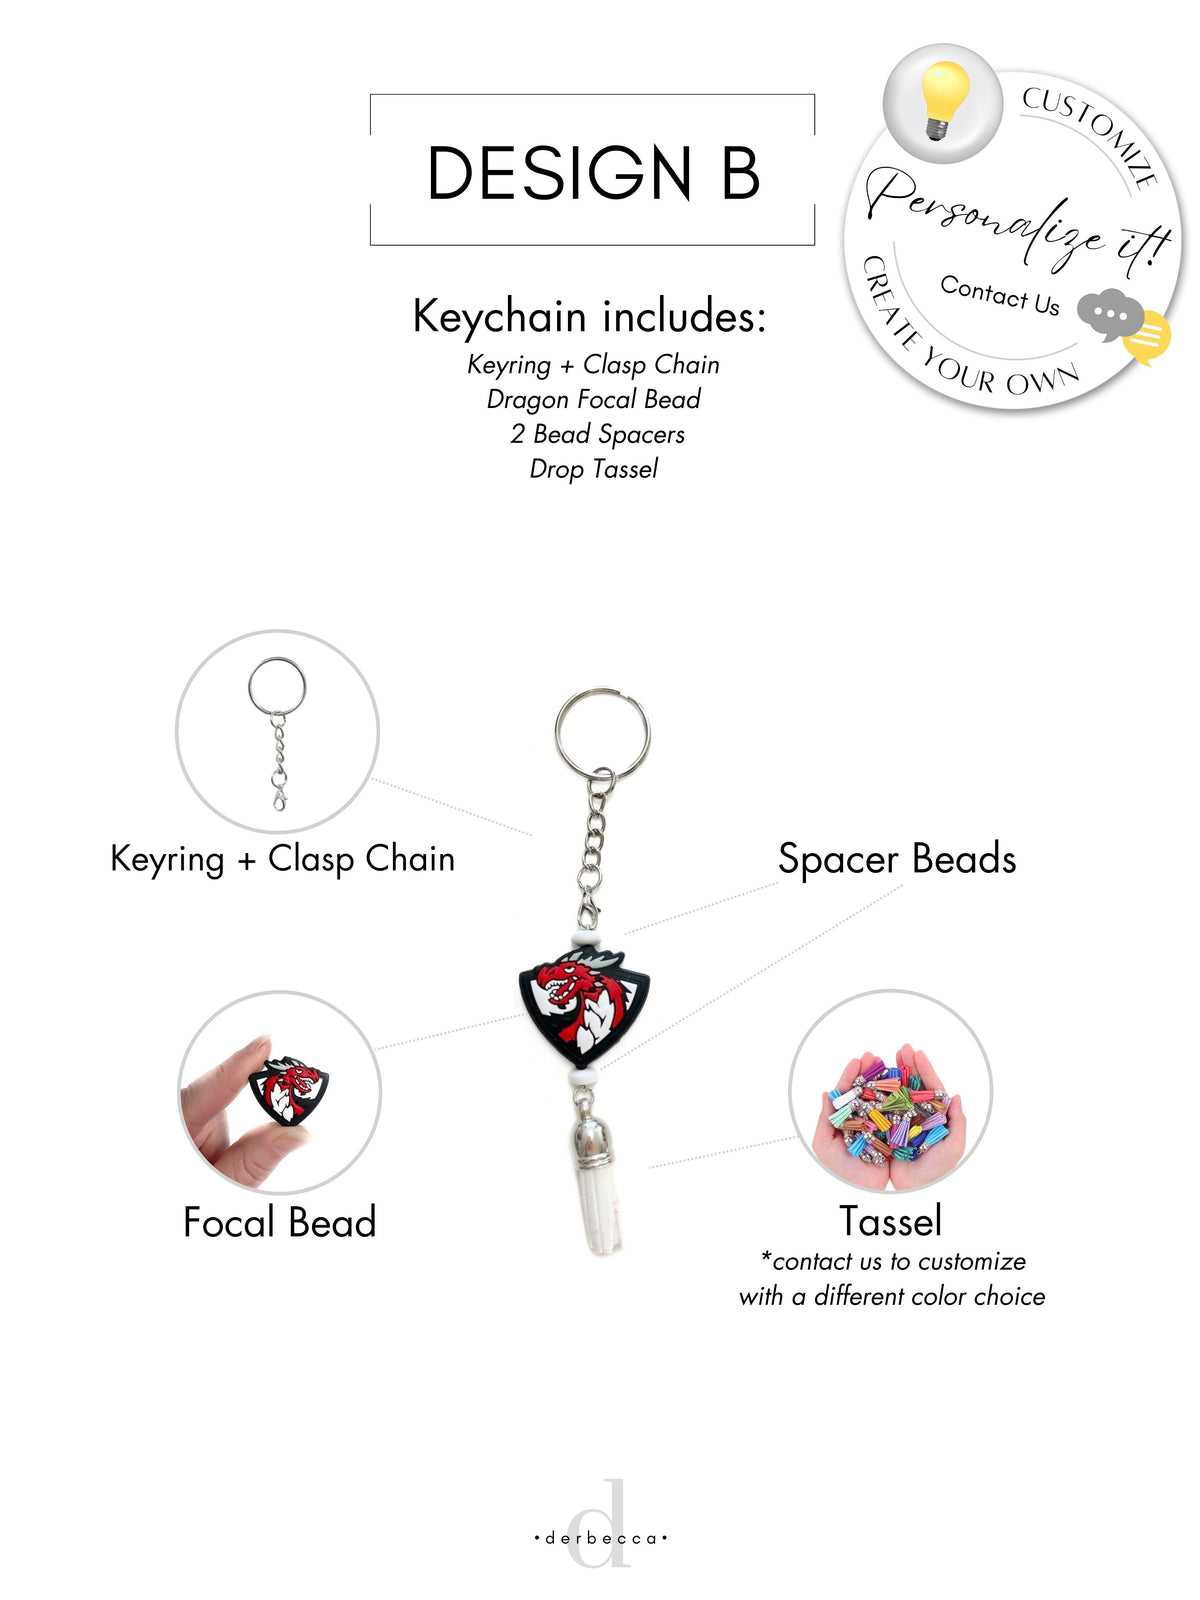 Split Ring 1" Keychain with Keyring + Clasp Chain Dragon Focal Bead  2 Bead Spacers Drop Tassel